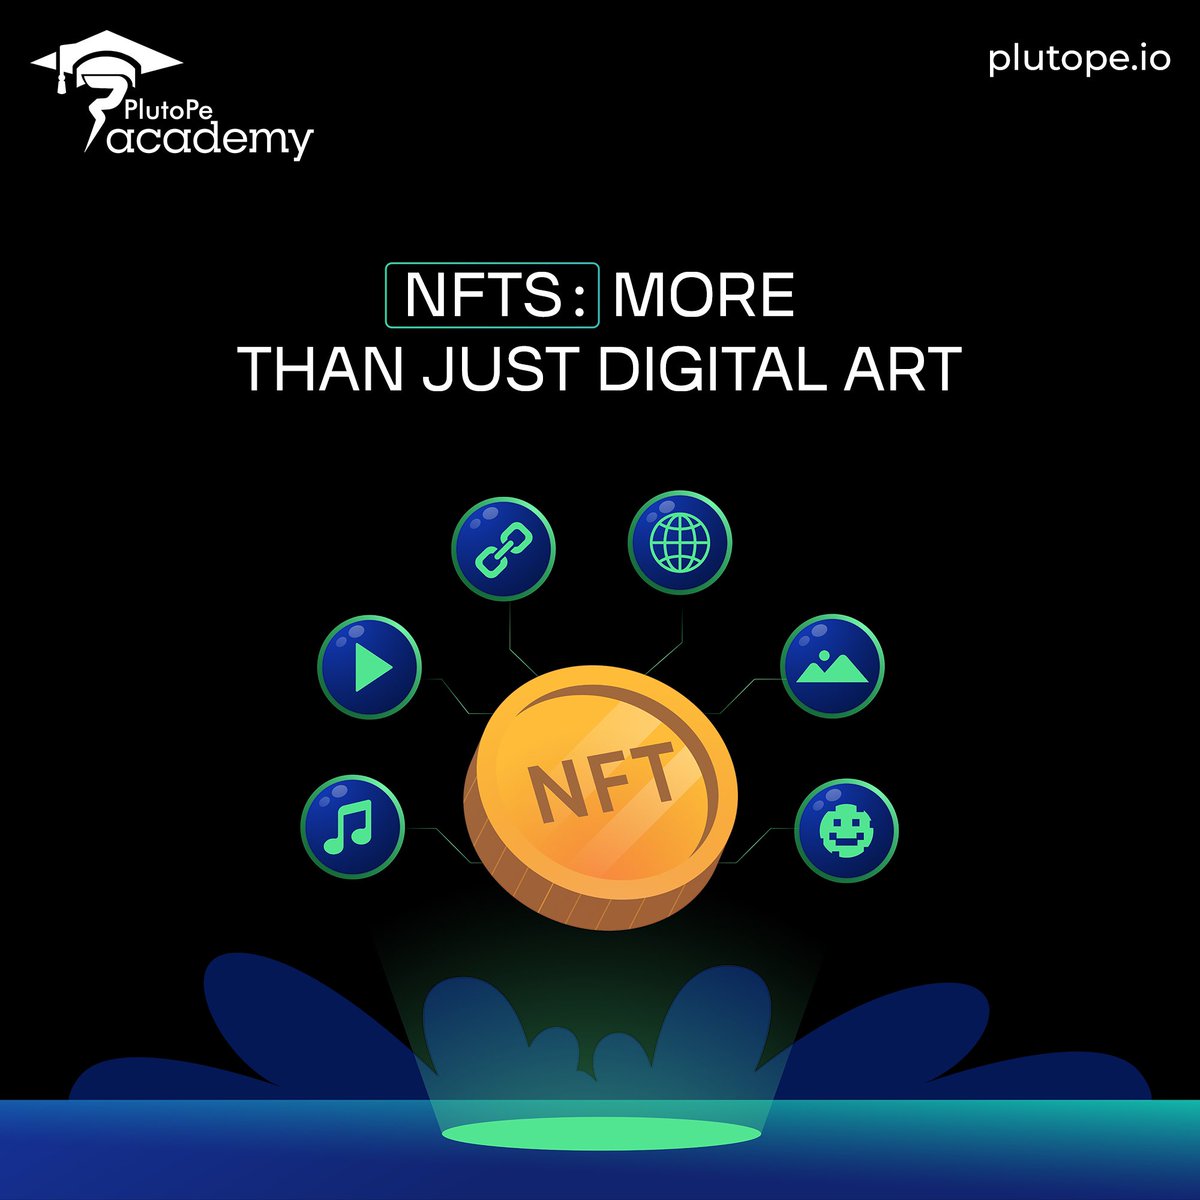 Beyond Cool Pictures: What Else Can NFTs Do? Remember trading cards you loved as a kid? Imagine those cards being digital and super unique, like having the only one in the world! That's NFTs: More Than Just Digital Art! 🤔 Think of it like this: GPay & Paytm let you pay